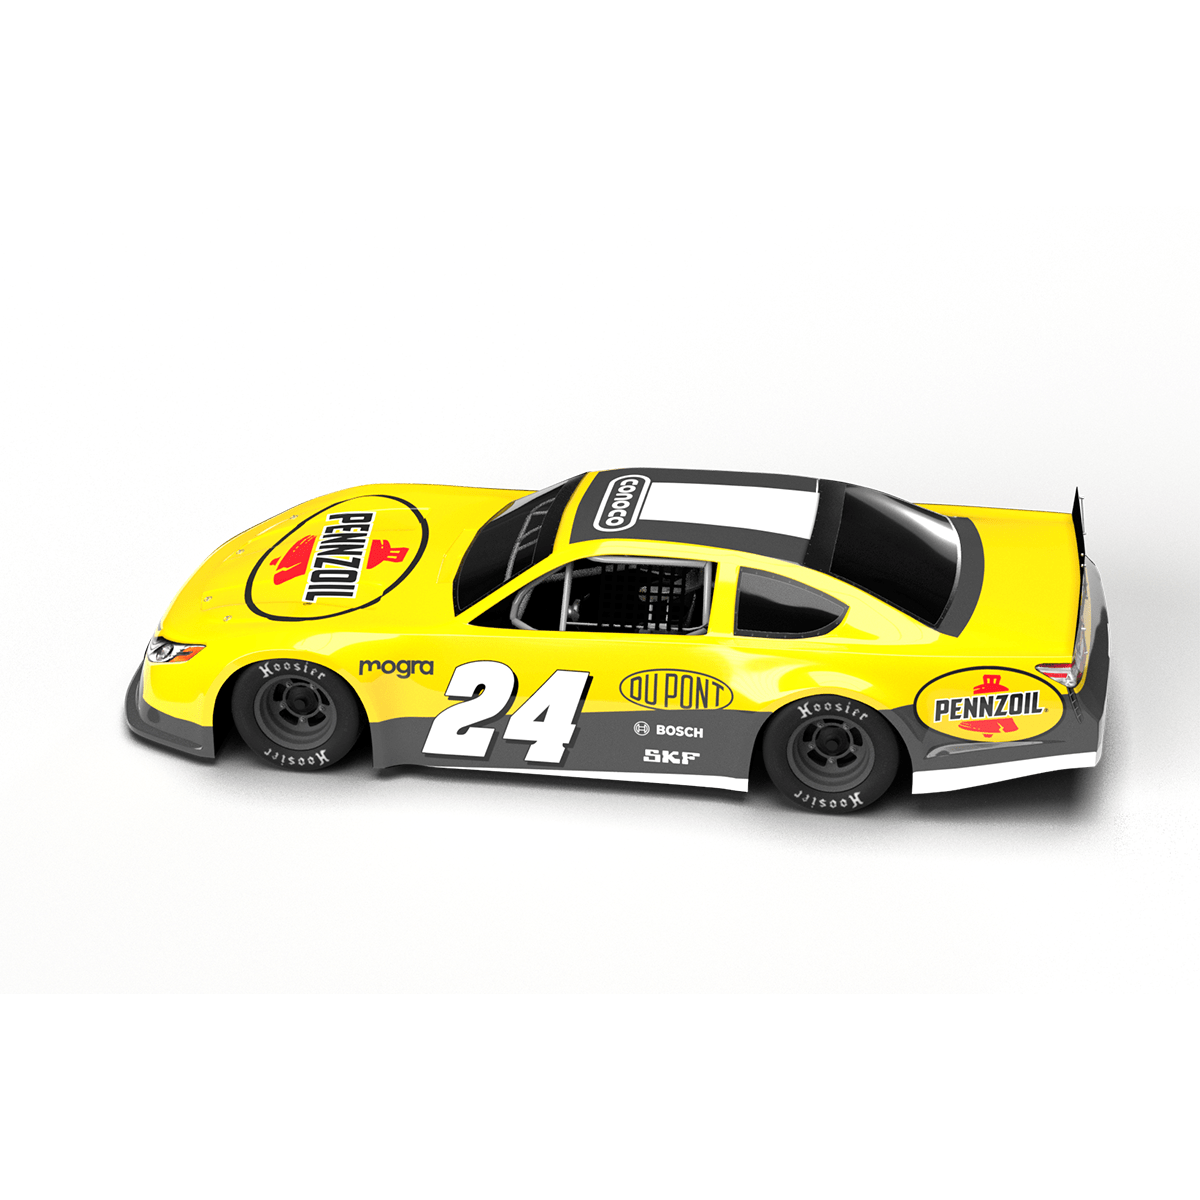 Gen 6 Toyota Camry Super Late Model 3D model livery template